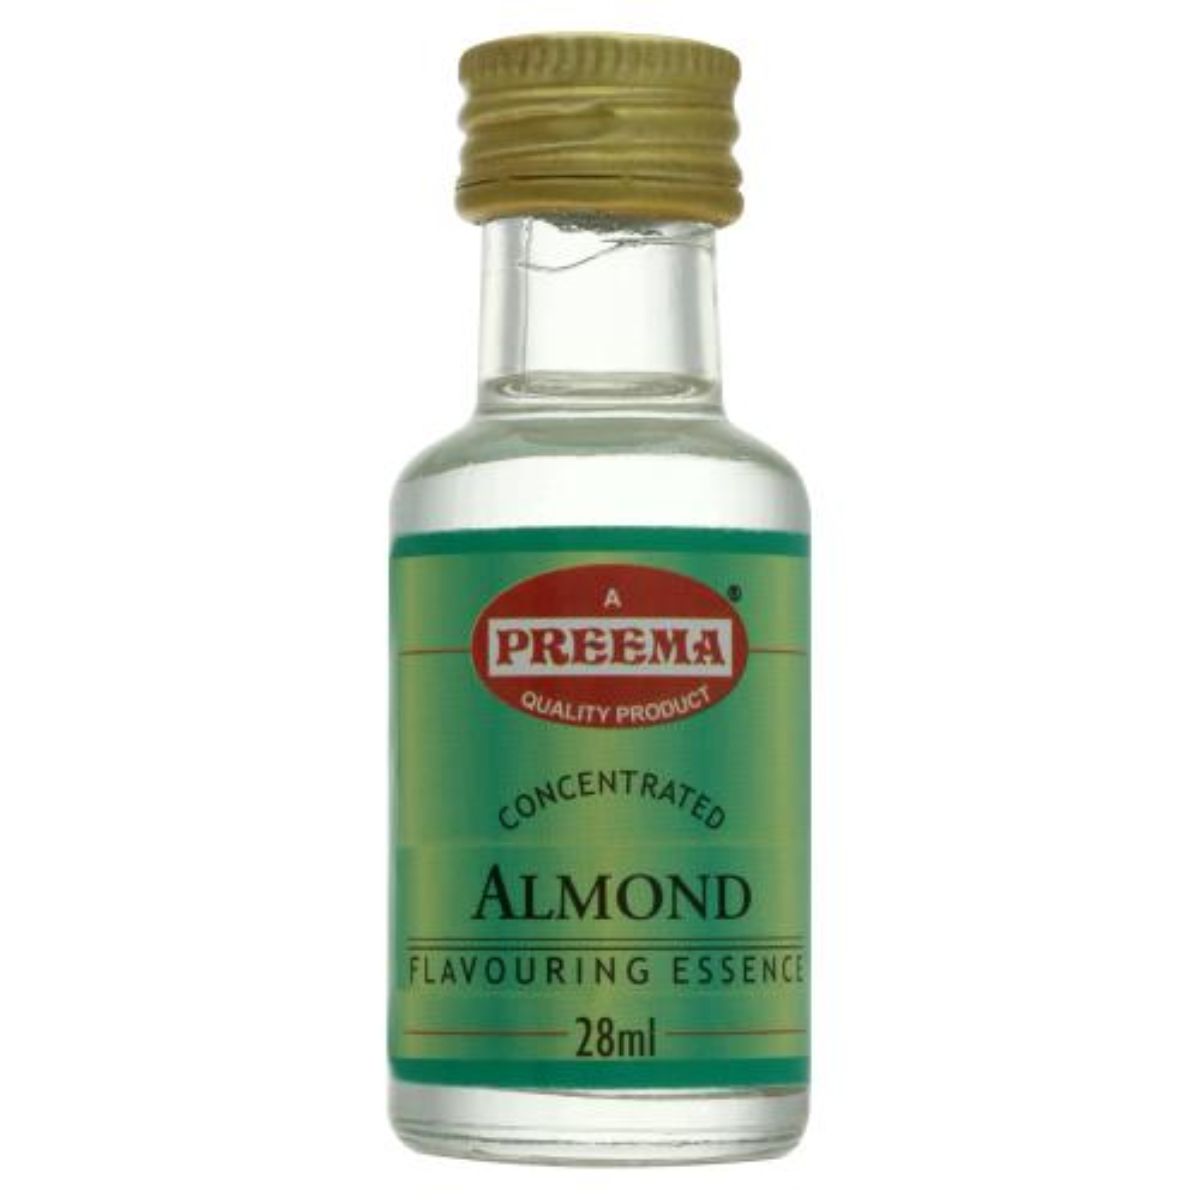 A bottle of Preema - Food Almond Flavouring Essence - 28ml.